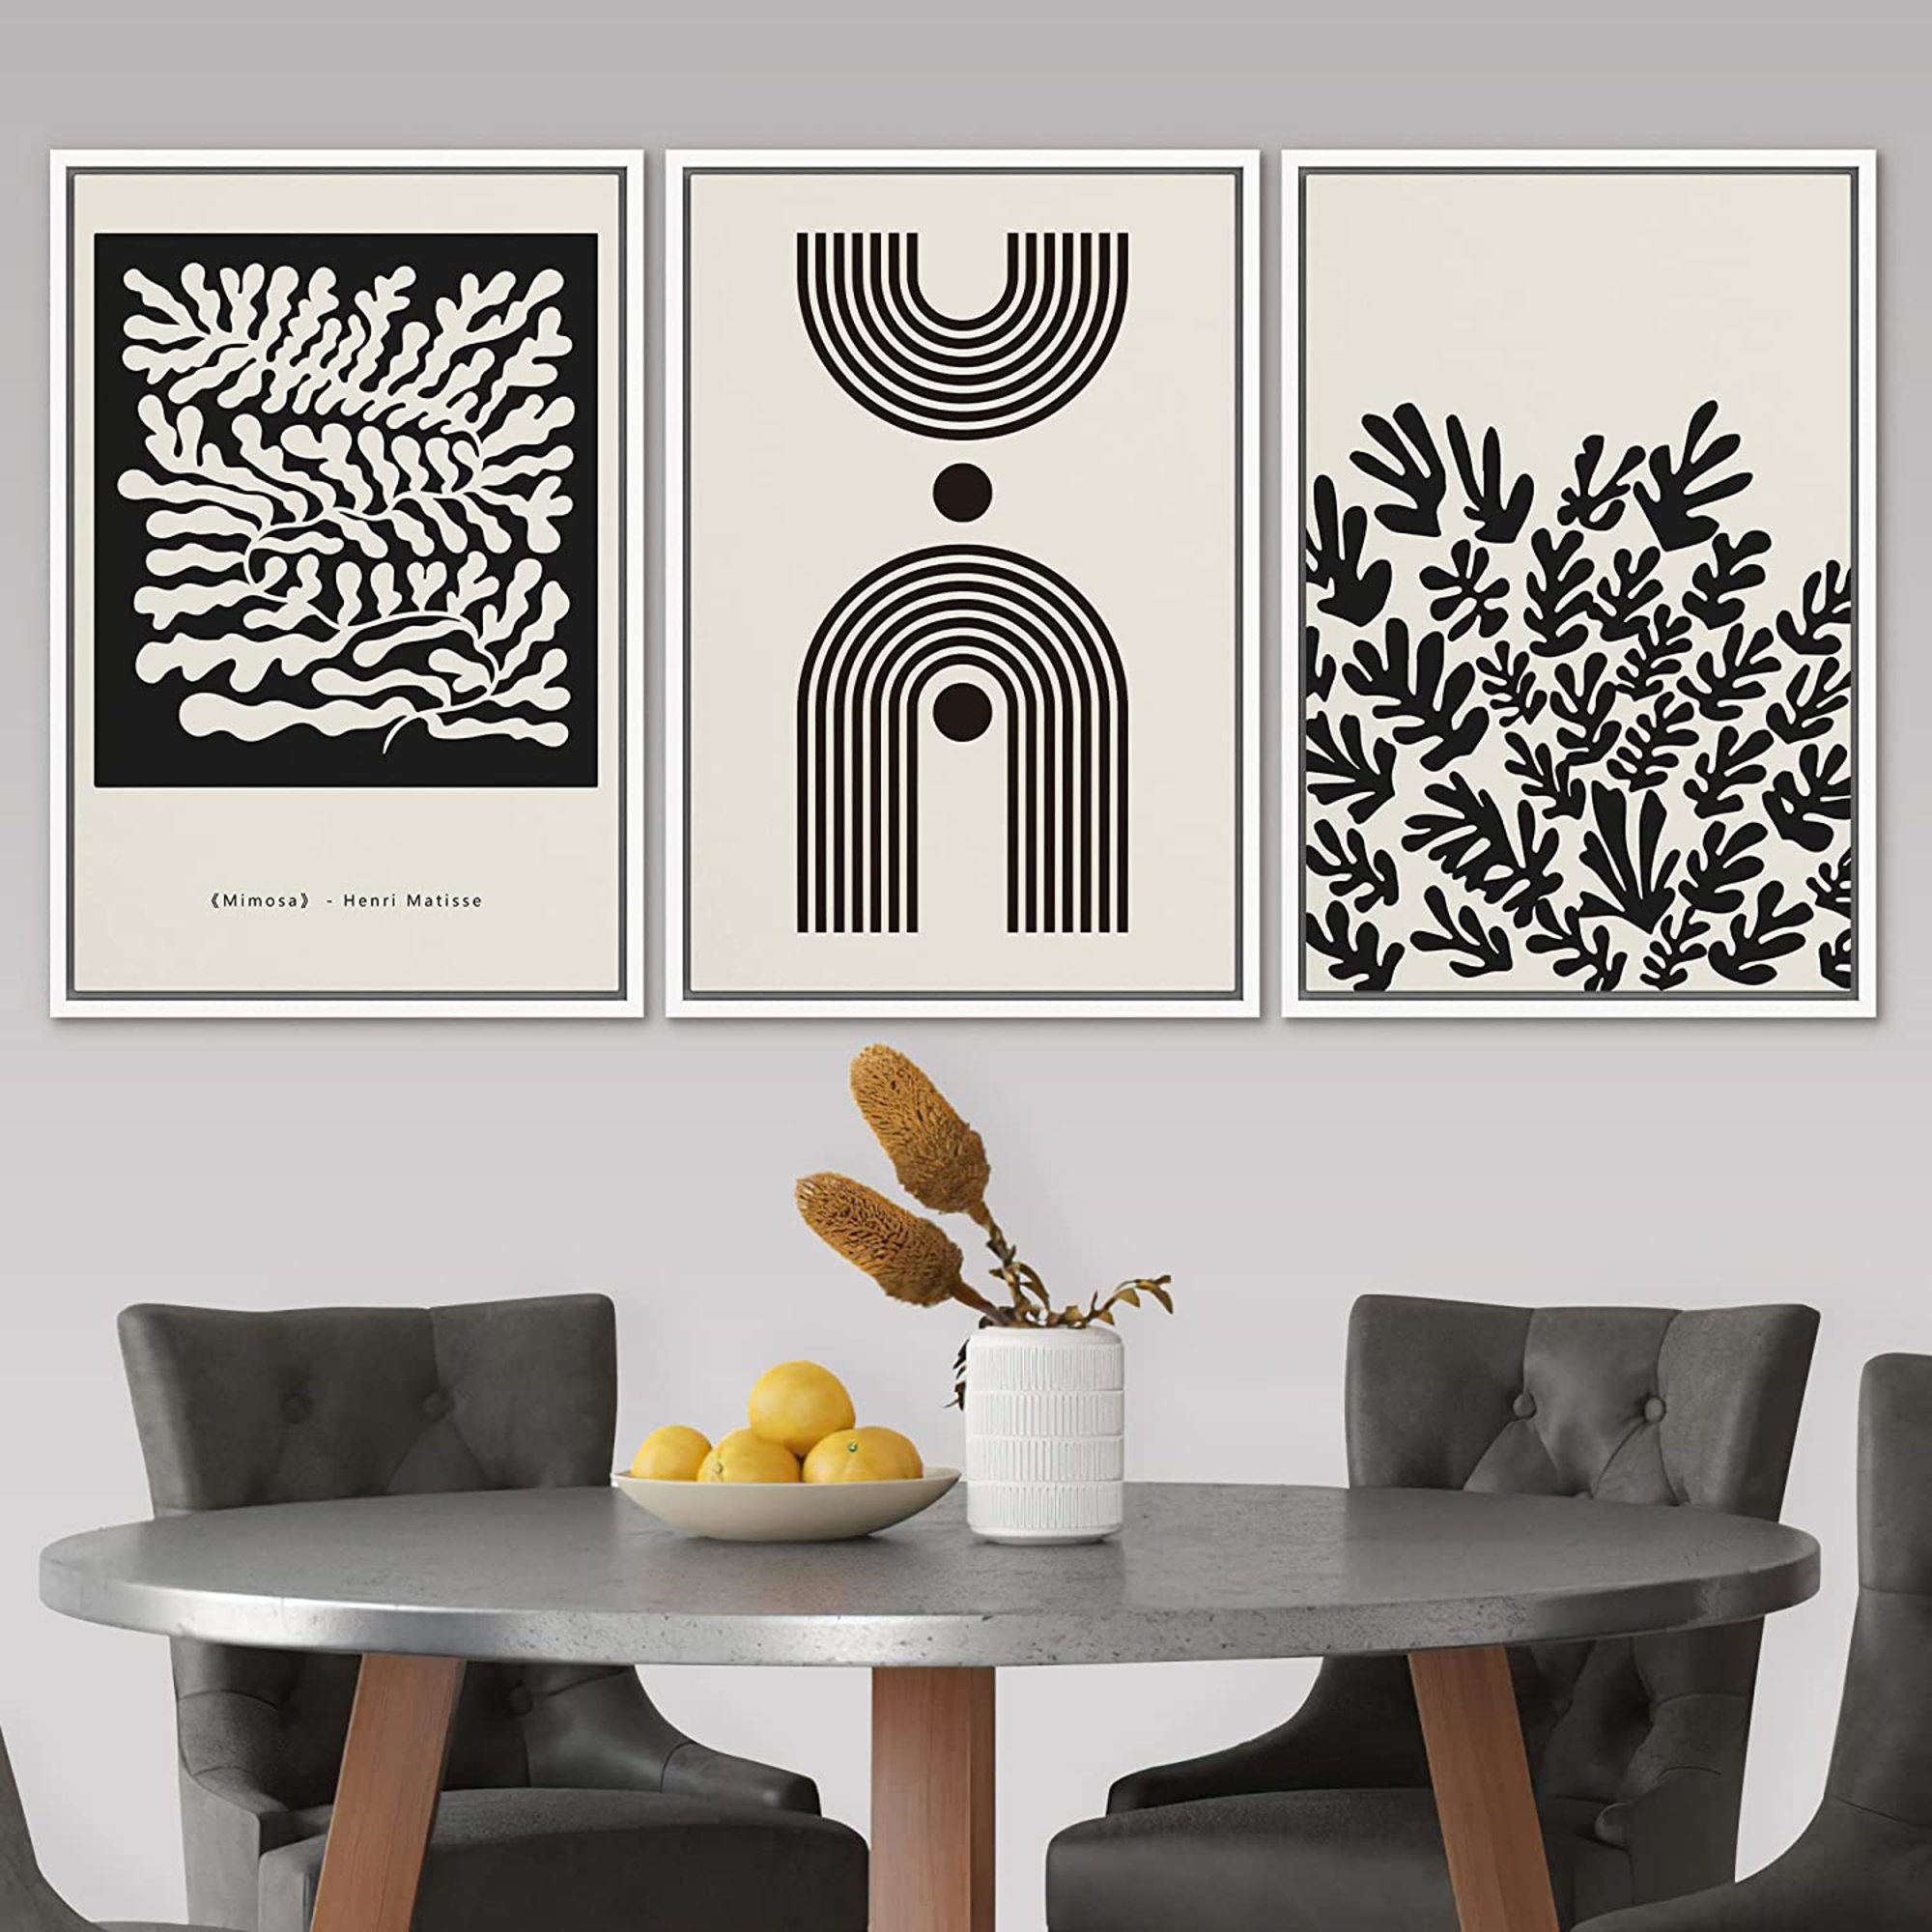 SIGNLEADER Geometric Dark Figure Forest Plant Collage Framed On Canvas 3  Pieces Print